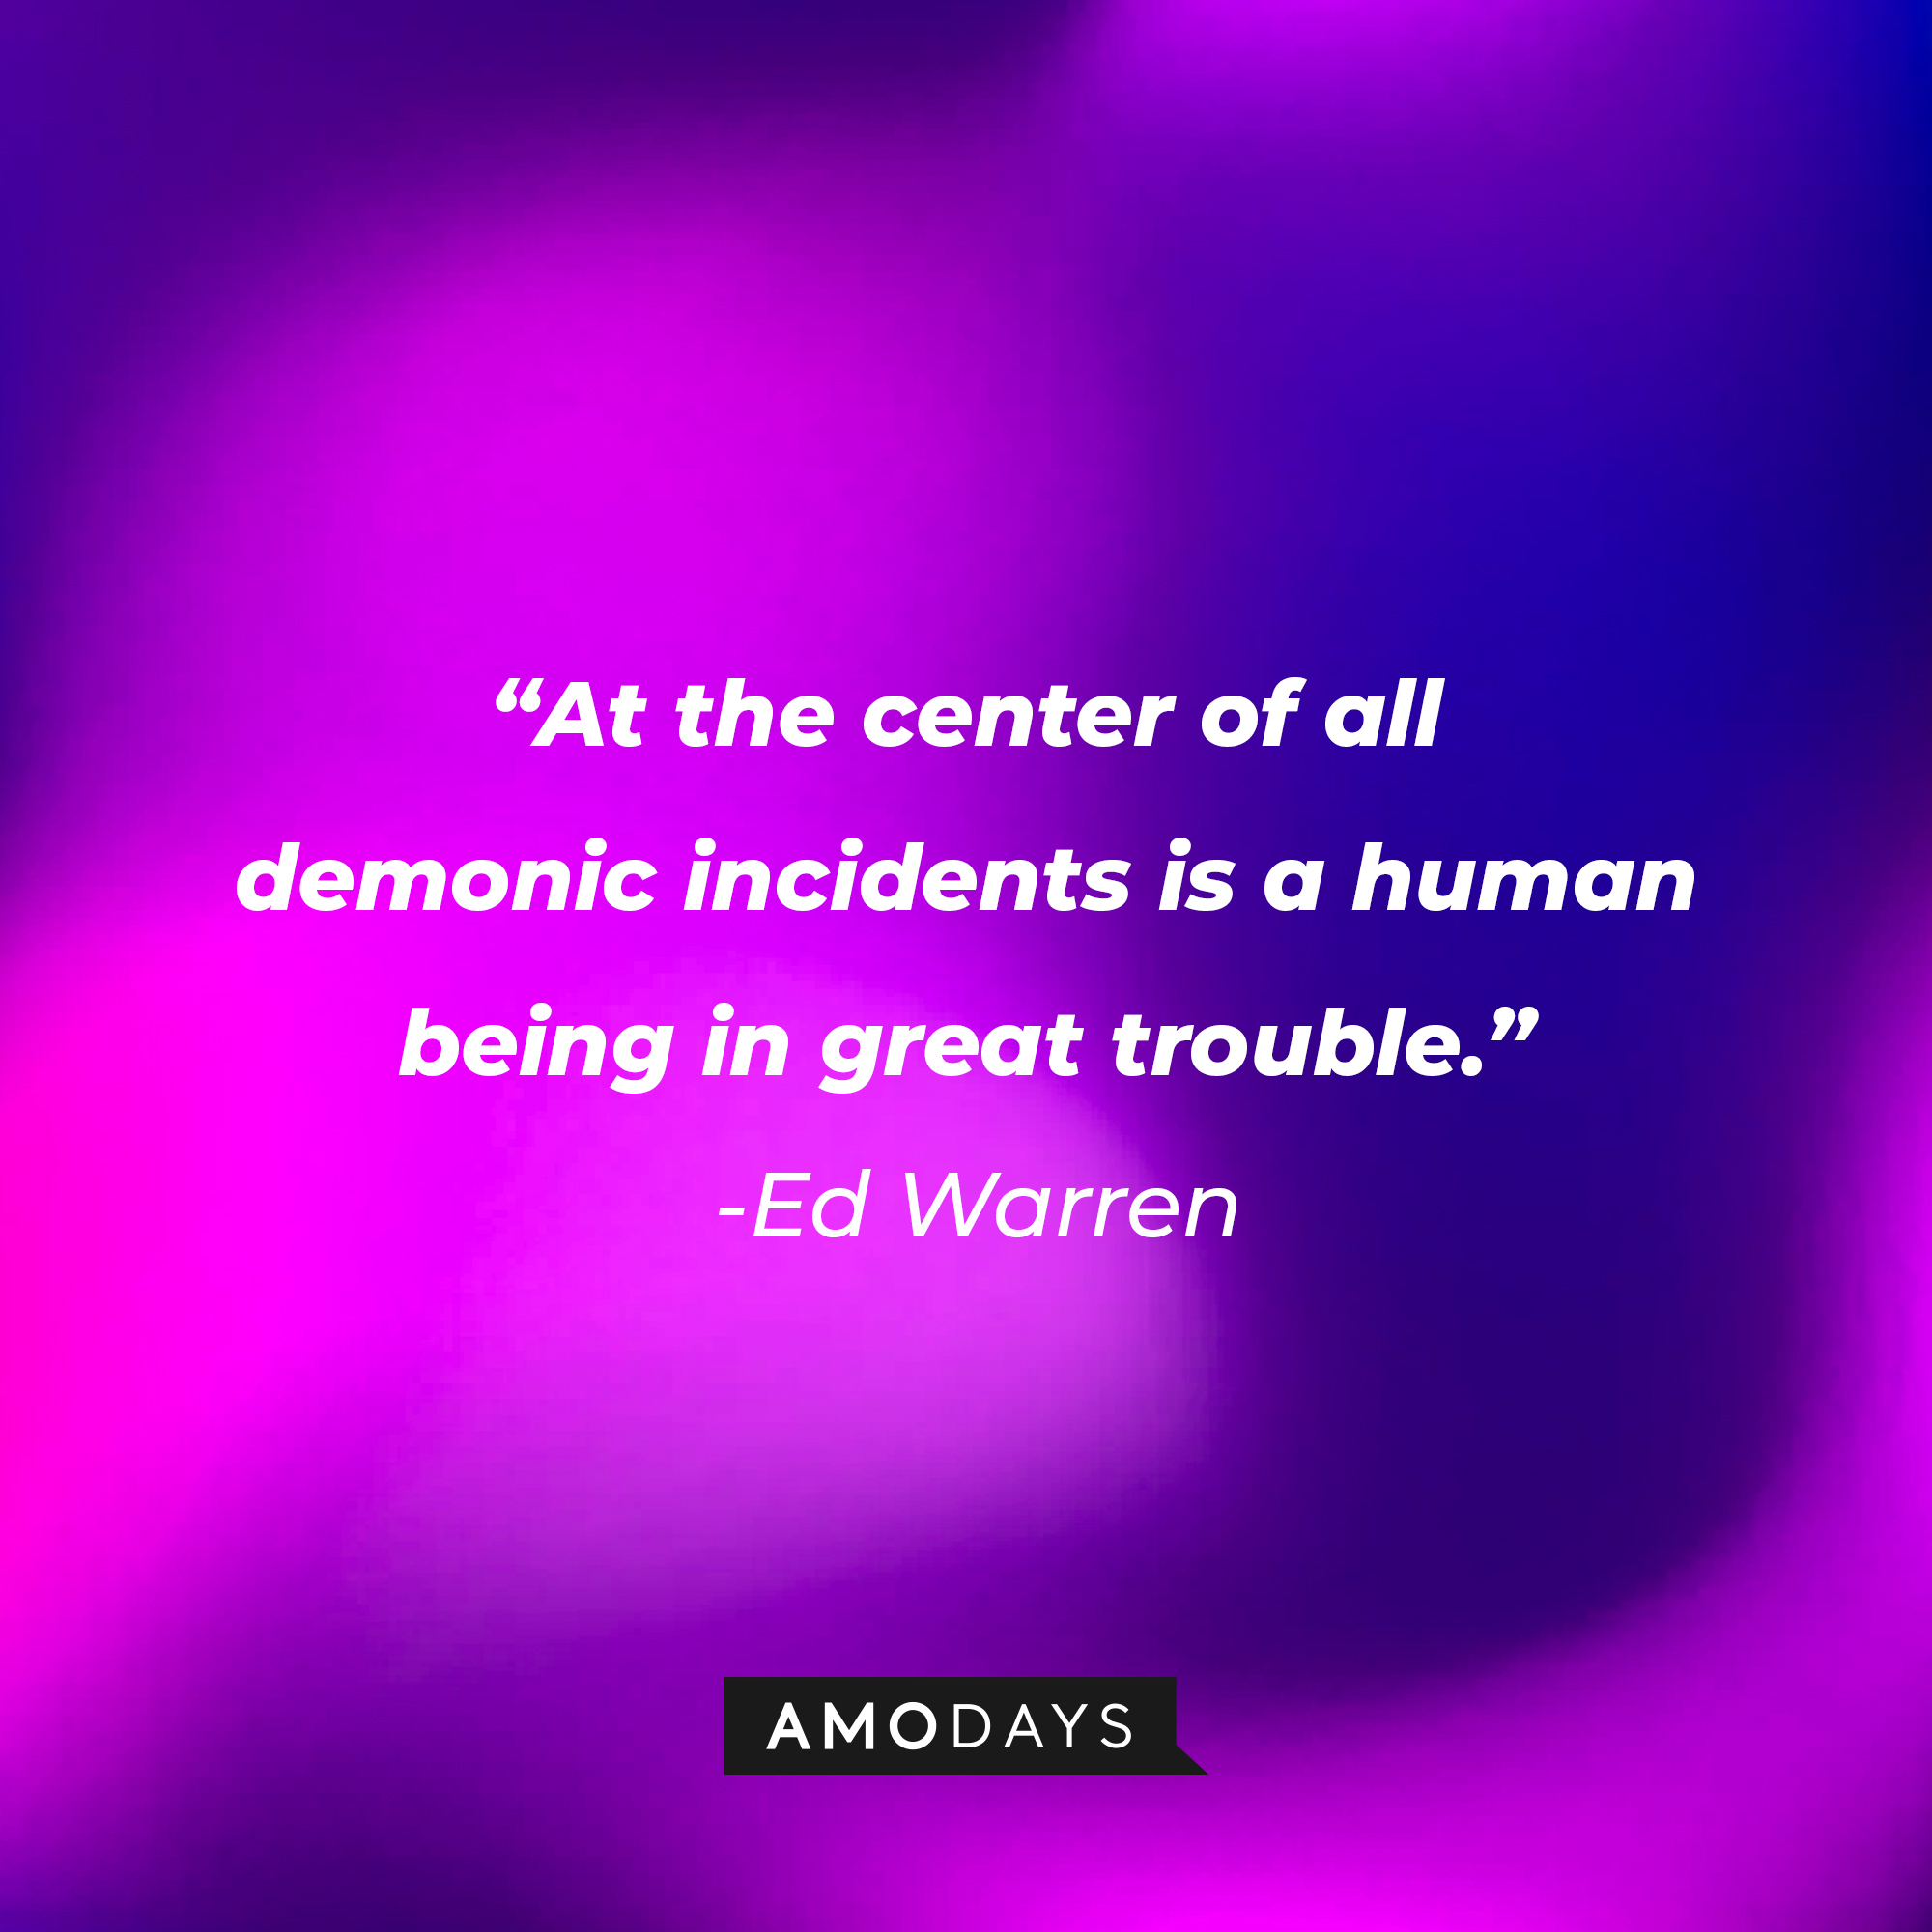 Ed Warren’s quote: “At the center of all demonic incidents is a human being in great trouble.” | Source: AmoDays